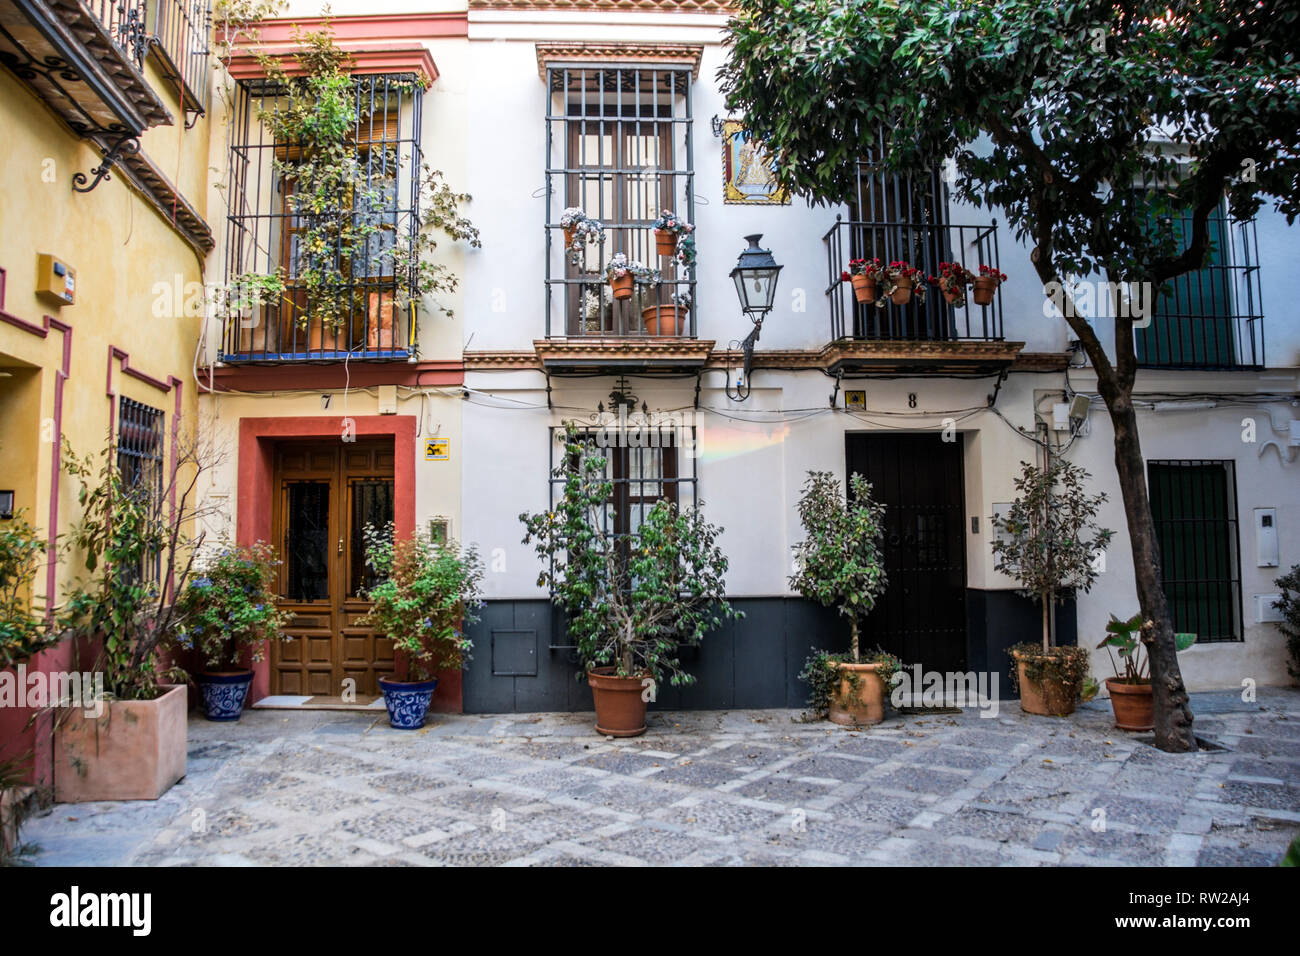 Apartments at the end of a culdesac in the city of Granada, Spain. Stock Photo